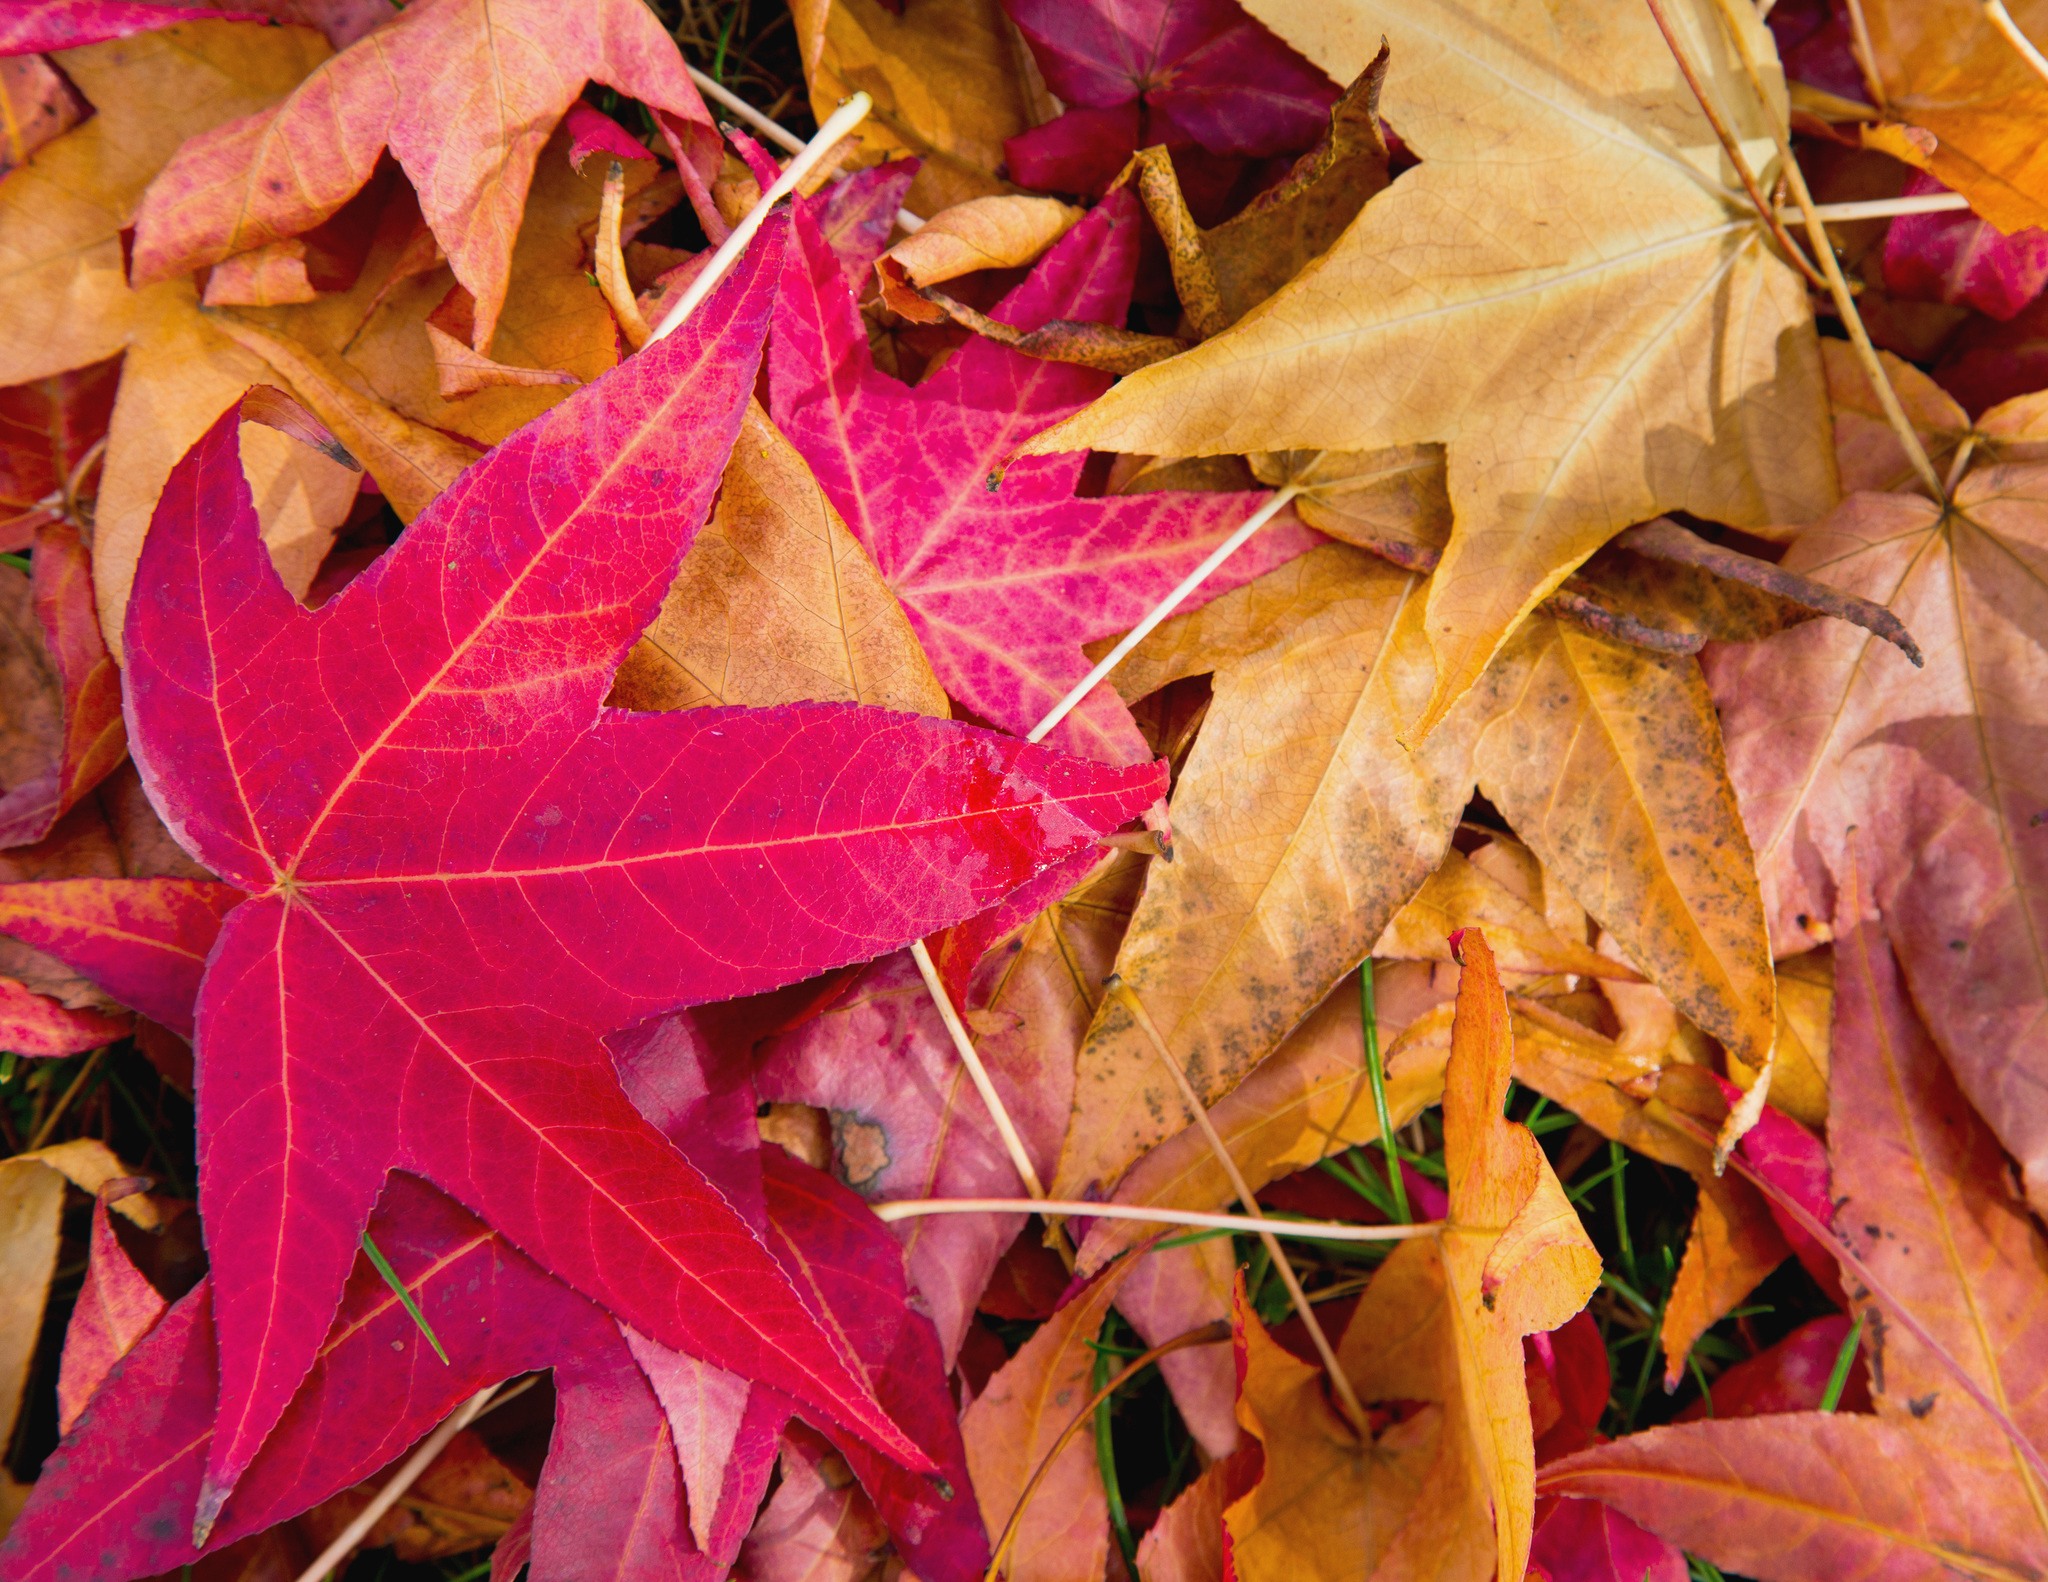 A close-up shot of fallen of autumn leaves carpeting the ground. Contributed photo